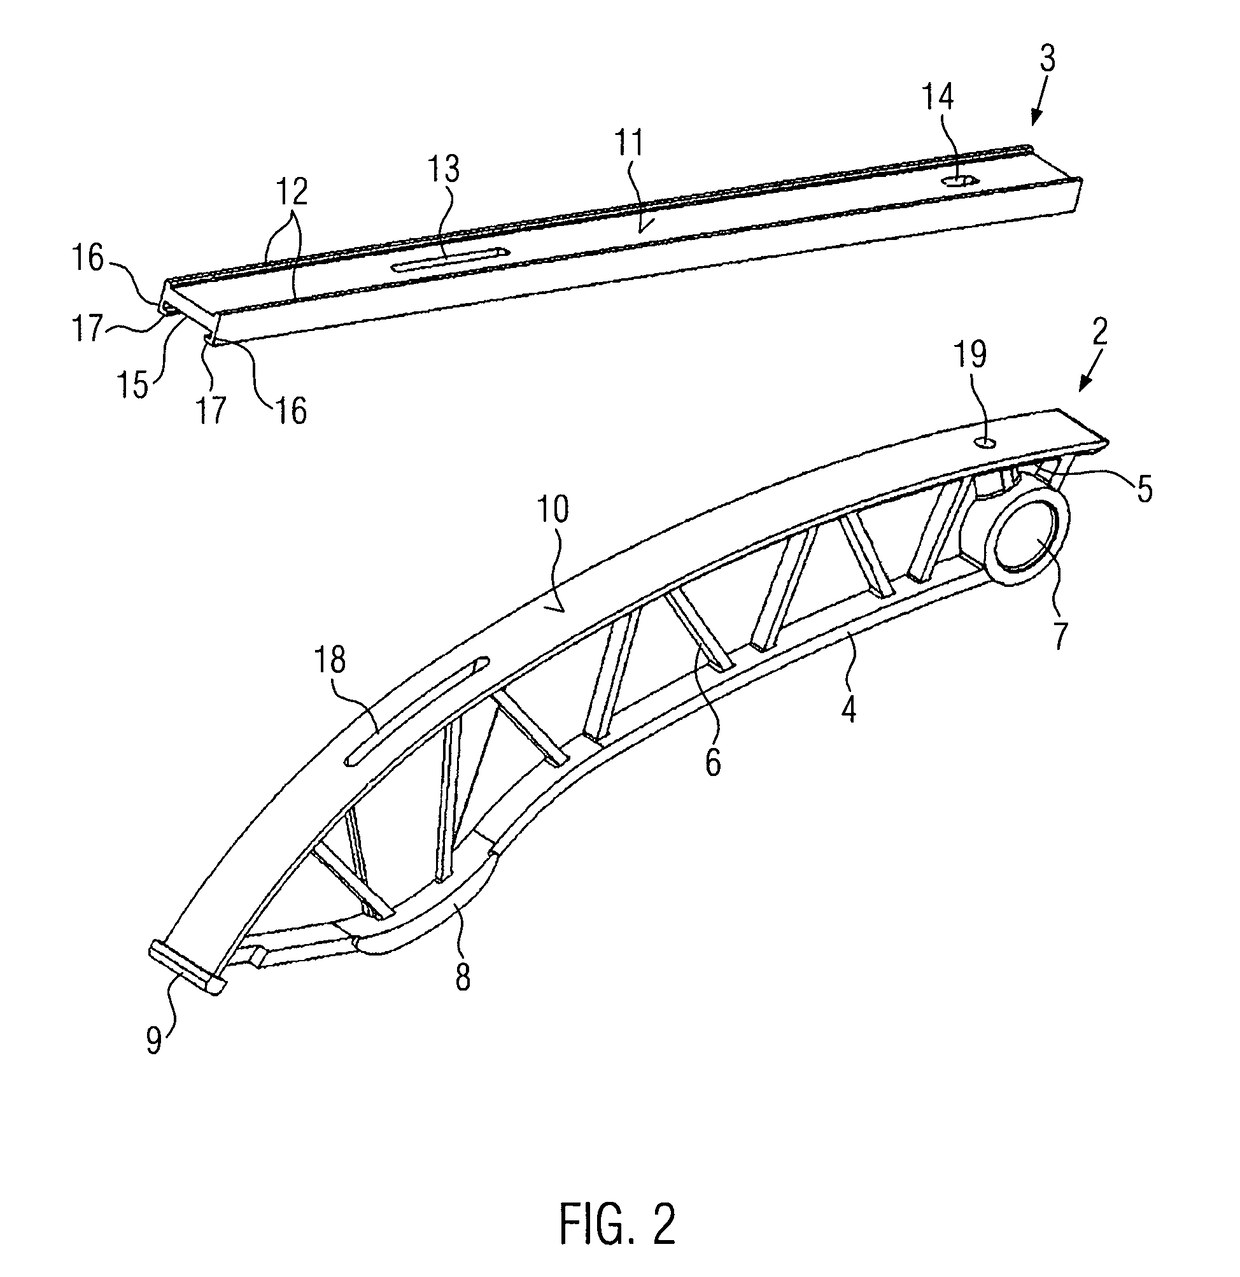 Tensioning or guide rail having an extruded sliding lining body